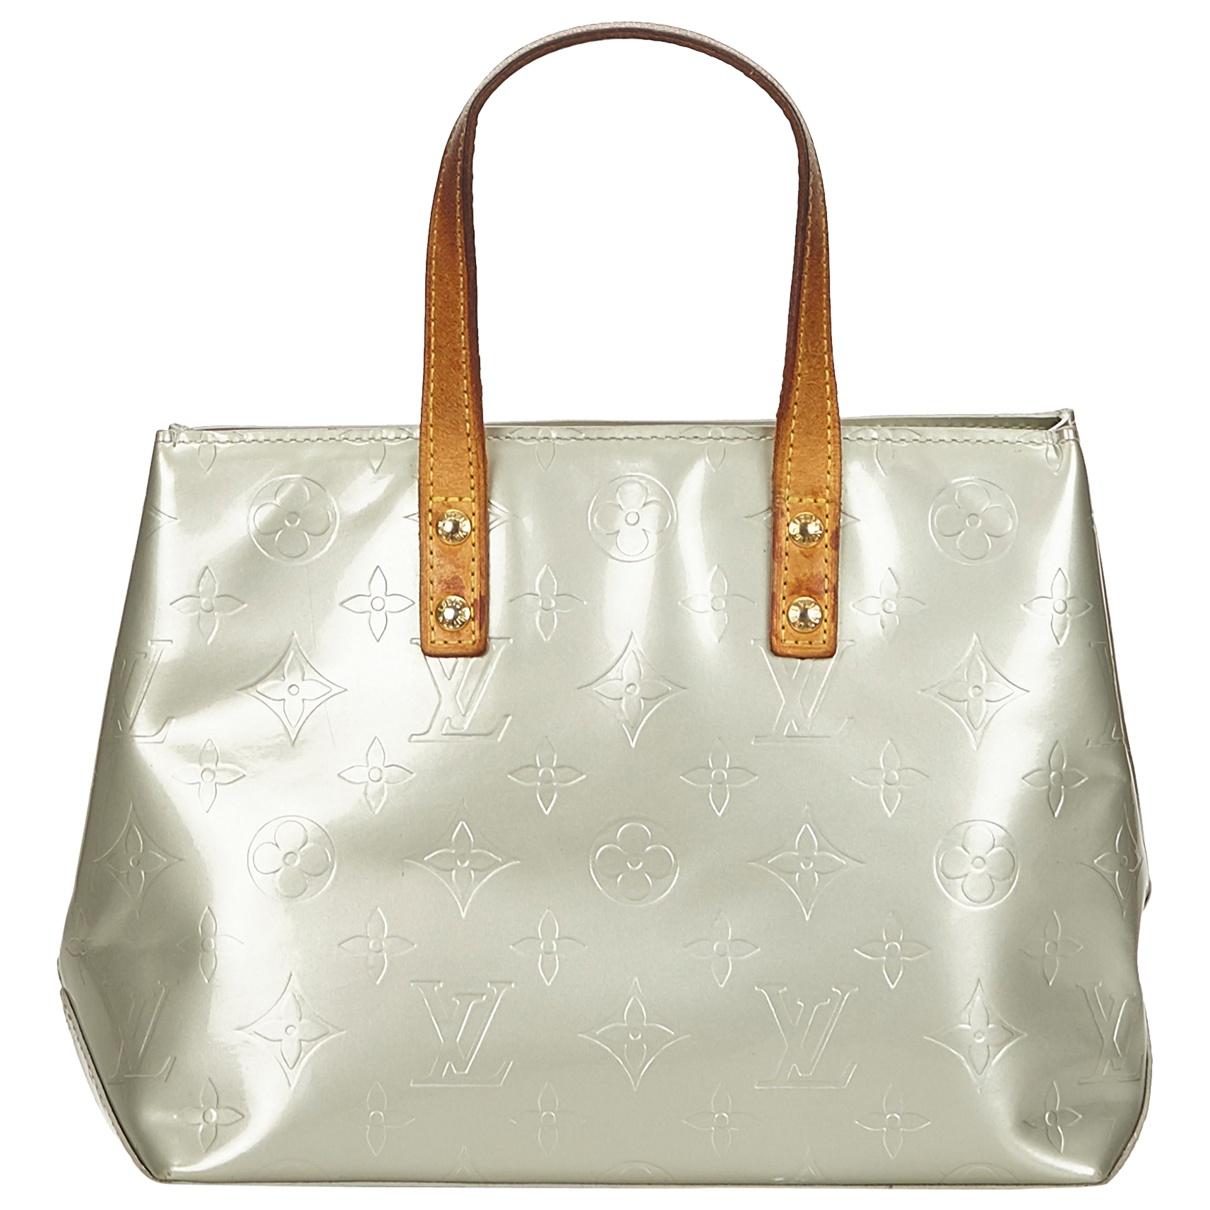 Lyst - Louis Vuitton Pre-owned Vintage Houston Silver Patent Leather Handbag in Metallic